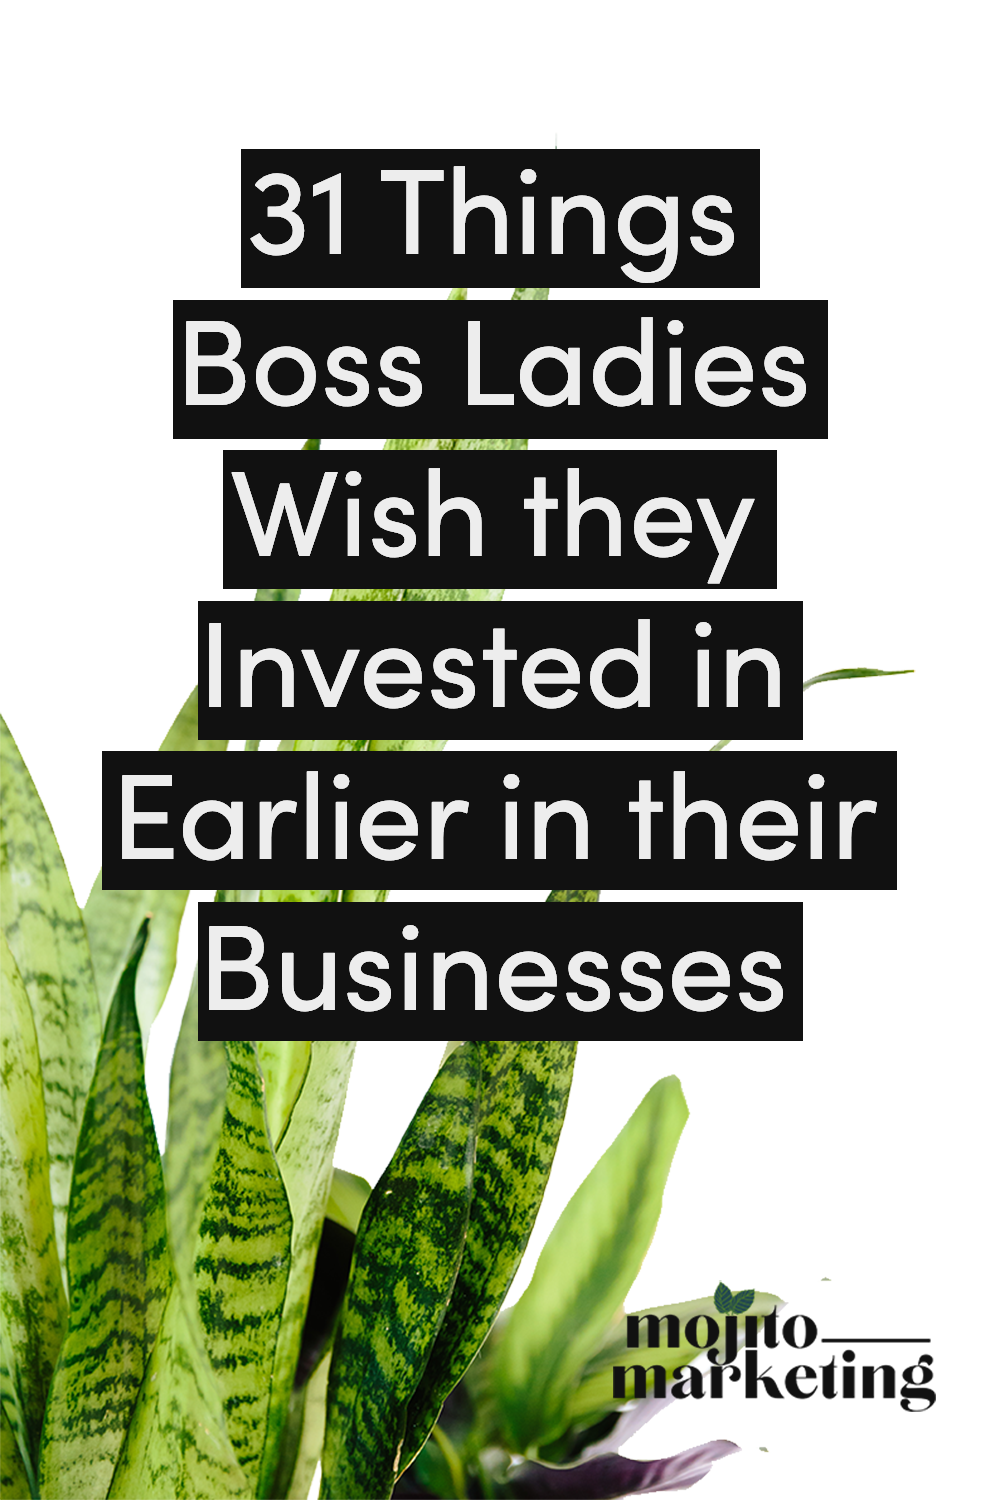 31_Things_Boss_Ladies_Wish_they_Invested_in_Earlier_in_their_Businesses_c.png